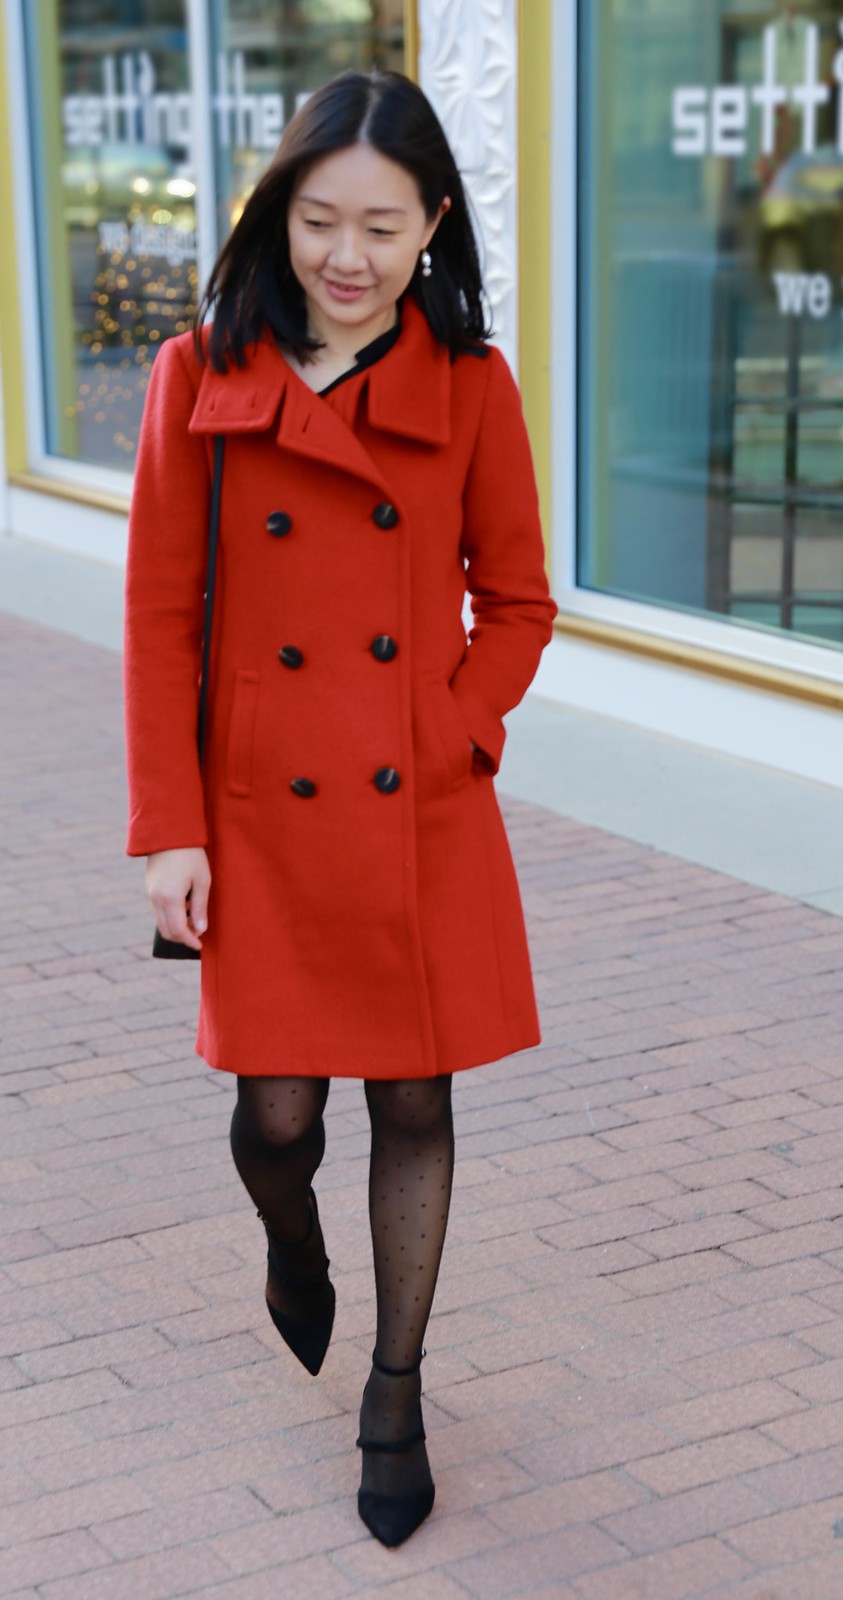 Red Statement Coat + Bow Details